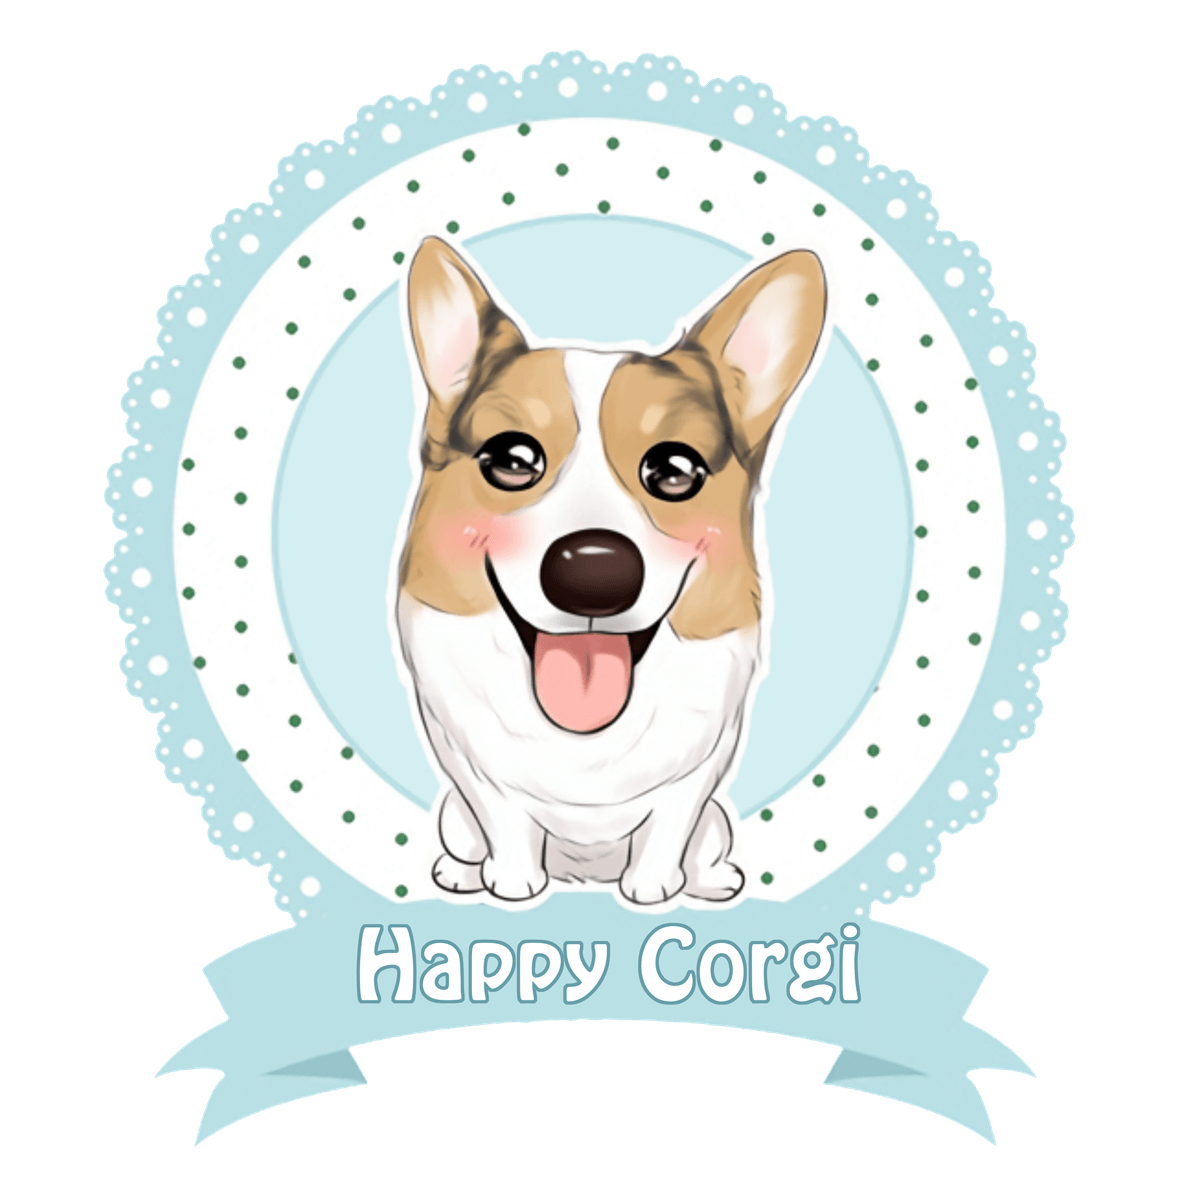 What is Normal Crystal Super Soft Fabric? - Happy Corgi